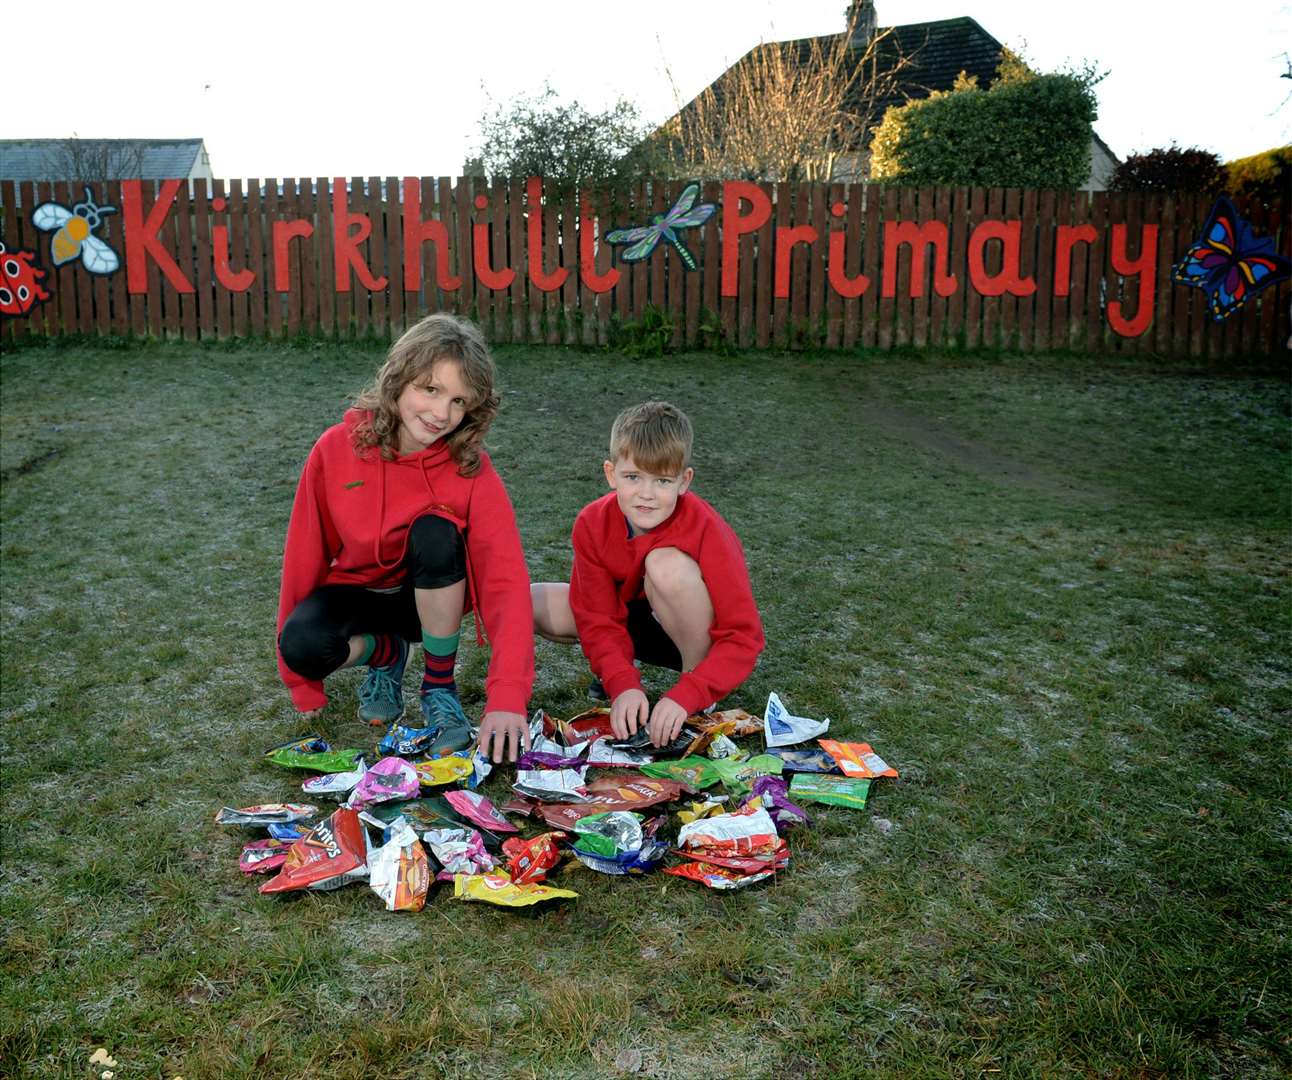 Kirkhill Primary School pupils Annie English and Robbie Stoddart sort out the empty crisp packets.